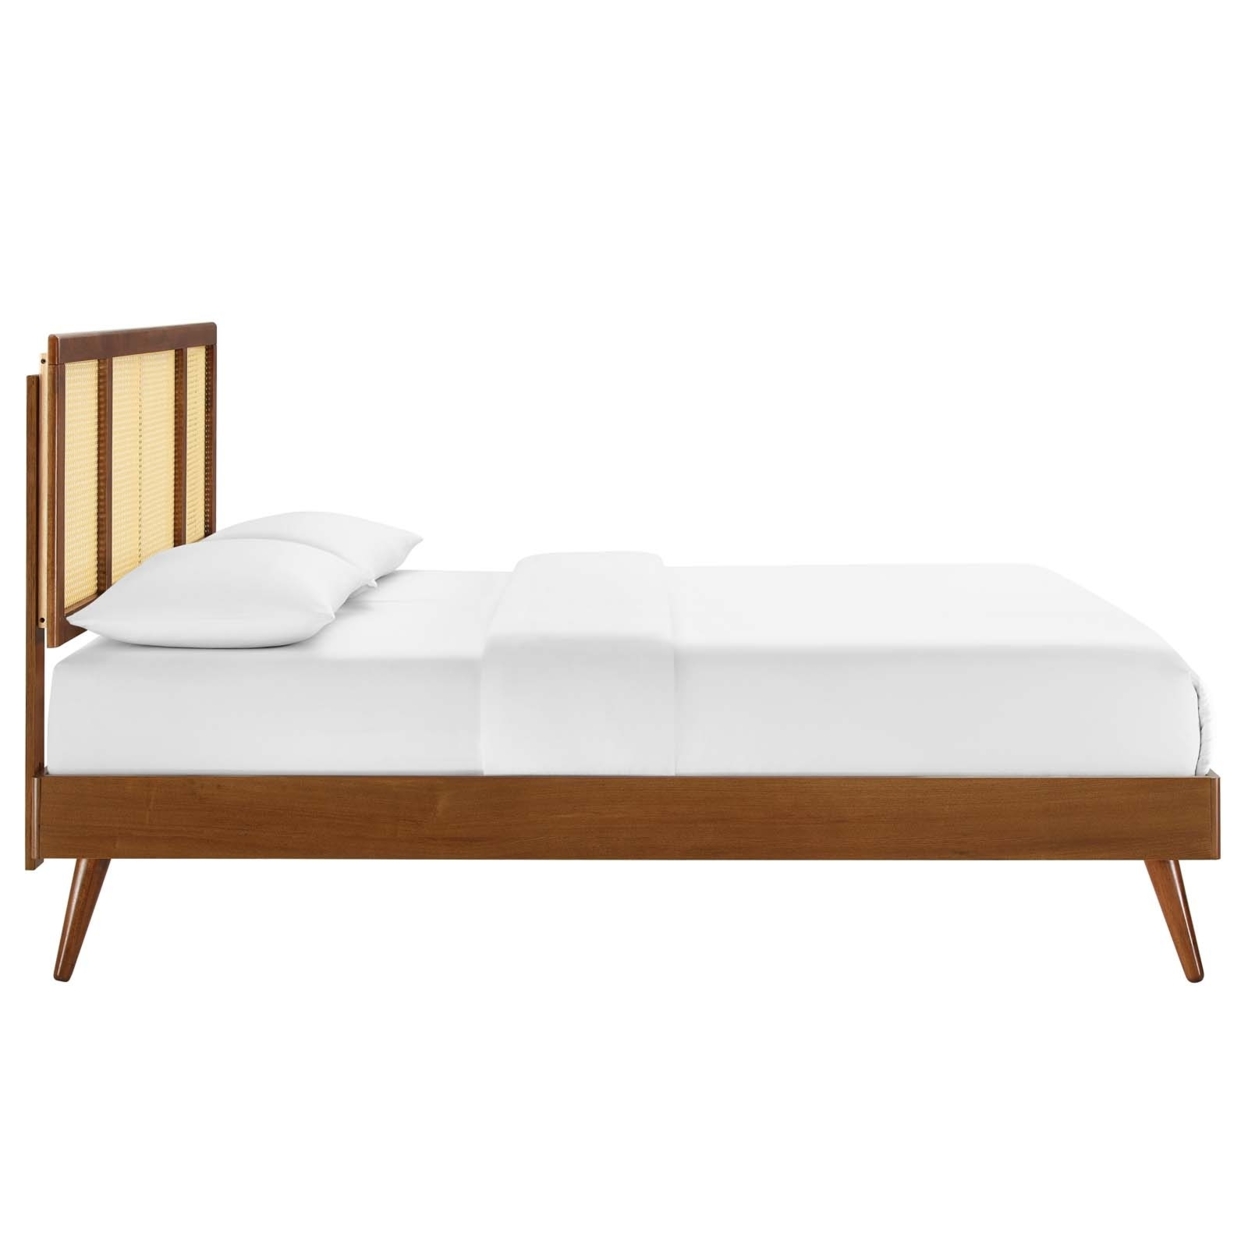 Kelsea Cane And Wood Queen Platform Bed With Splayed Legs, Walnut